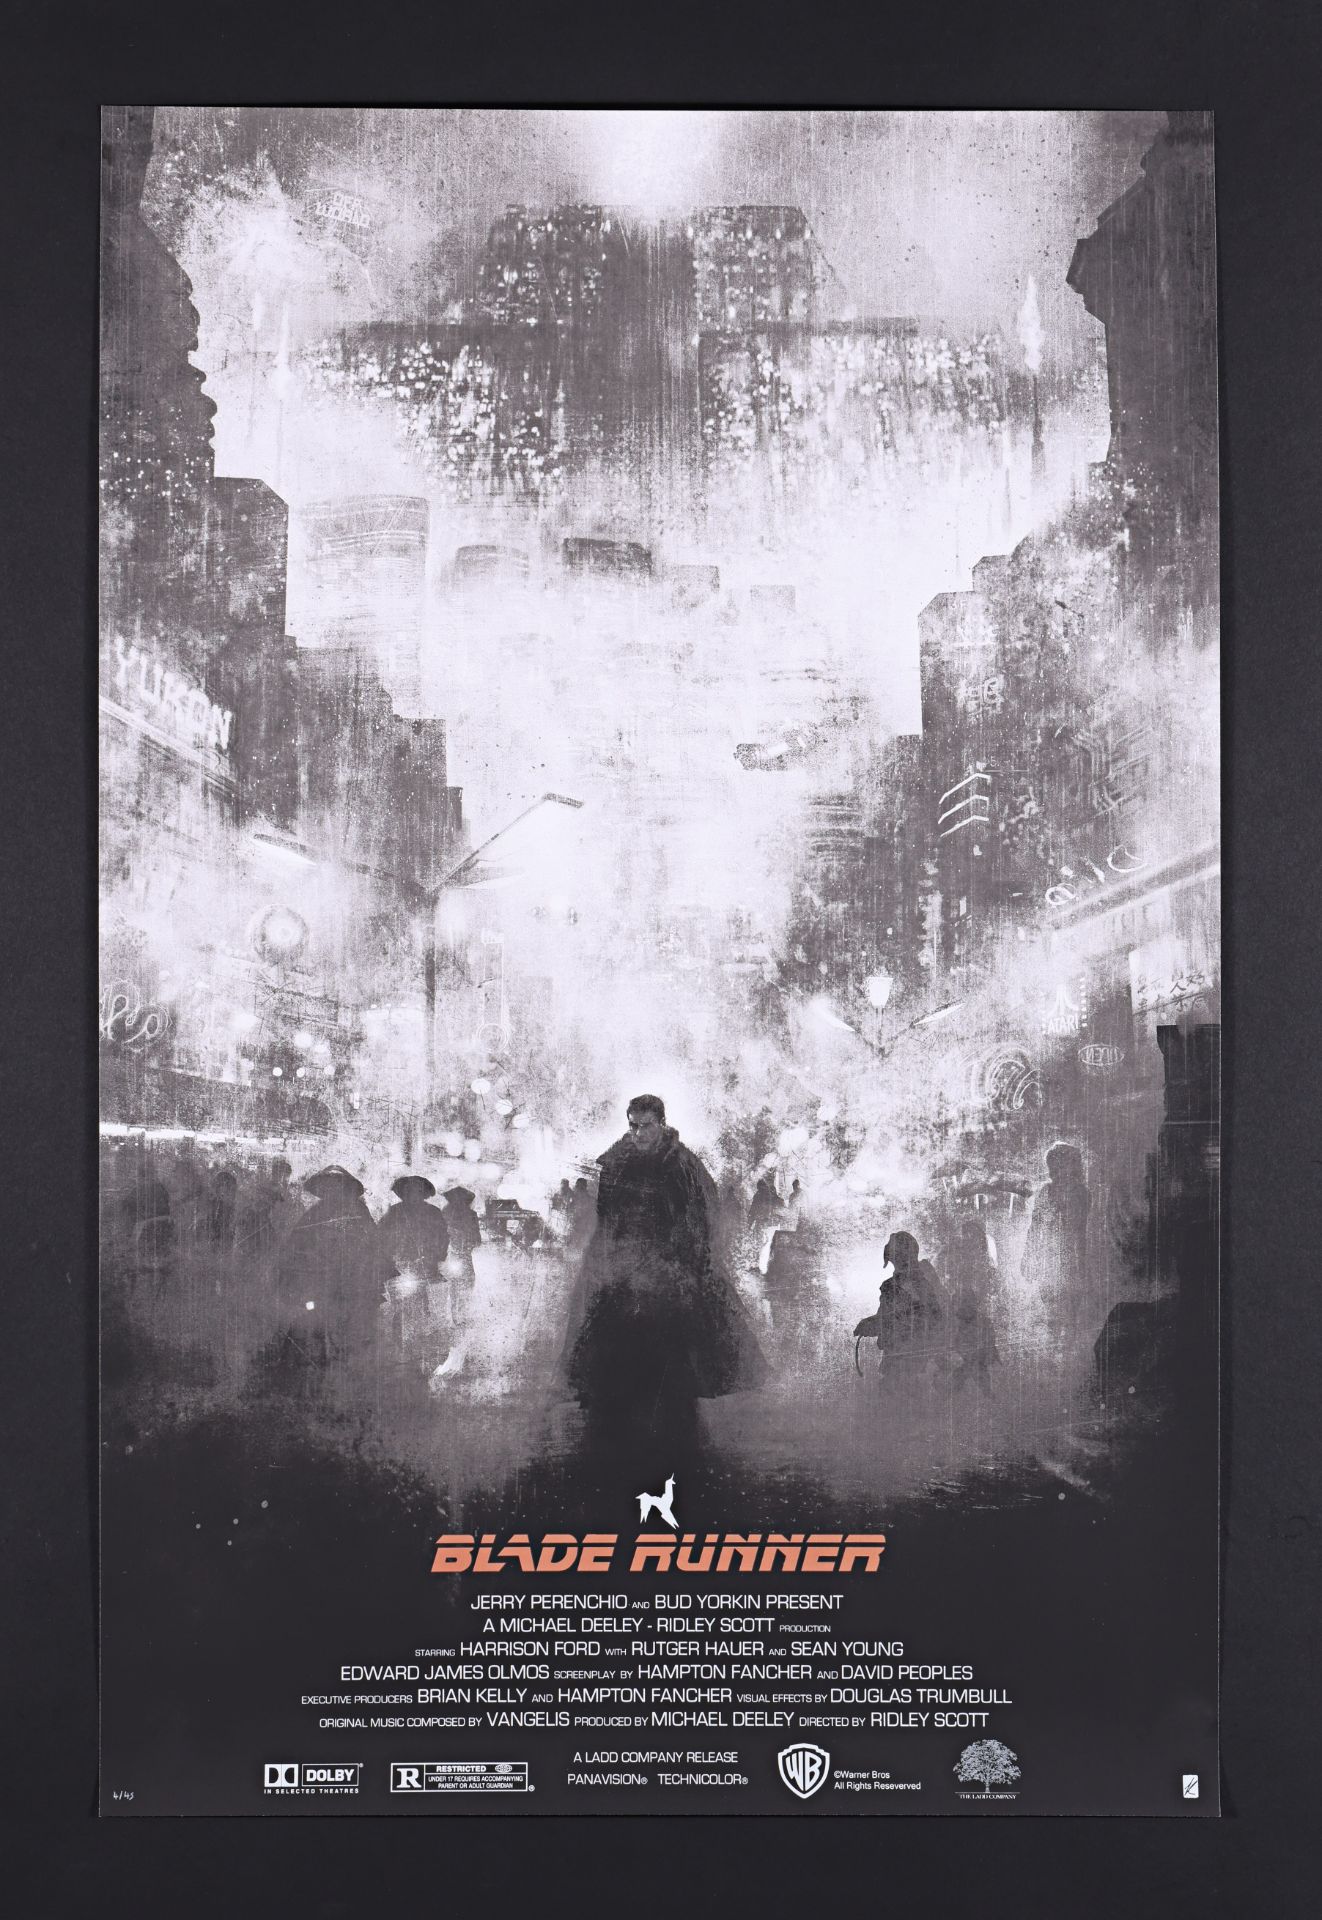 BLADE RUNNER (1982) - Hand-Numbered Limited Edition Variant Print by Karl Fitzgerald, 2016